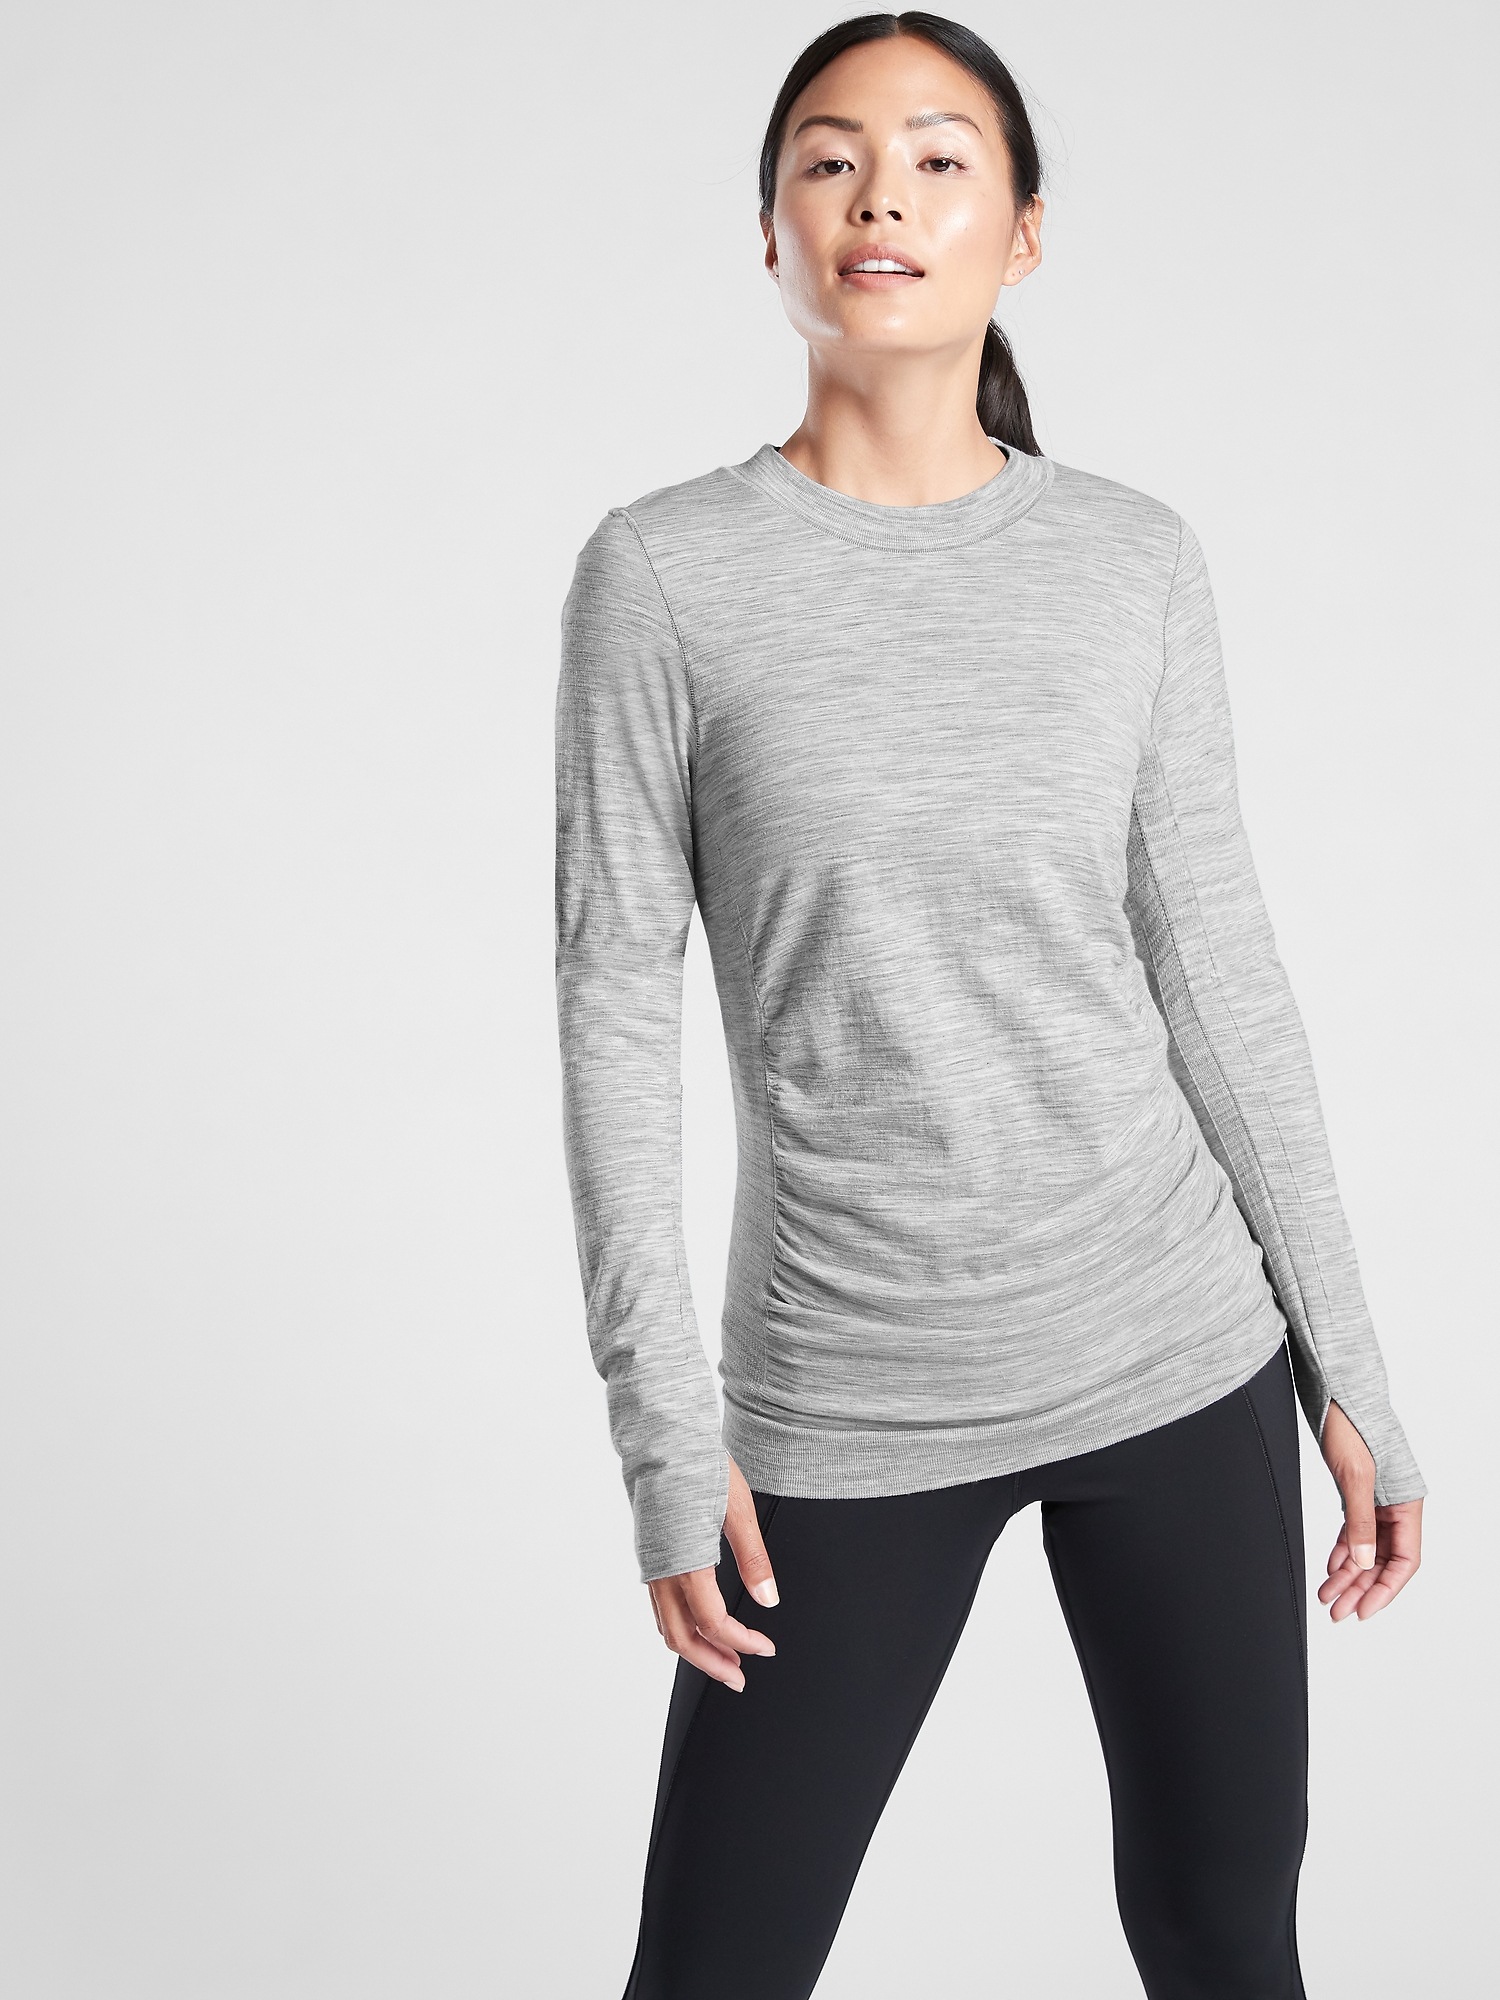 Thumbnail of Foresthill Ascent Seamless Top